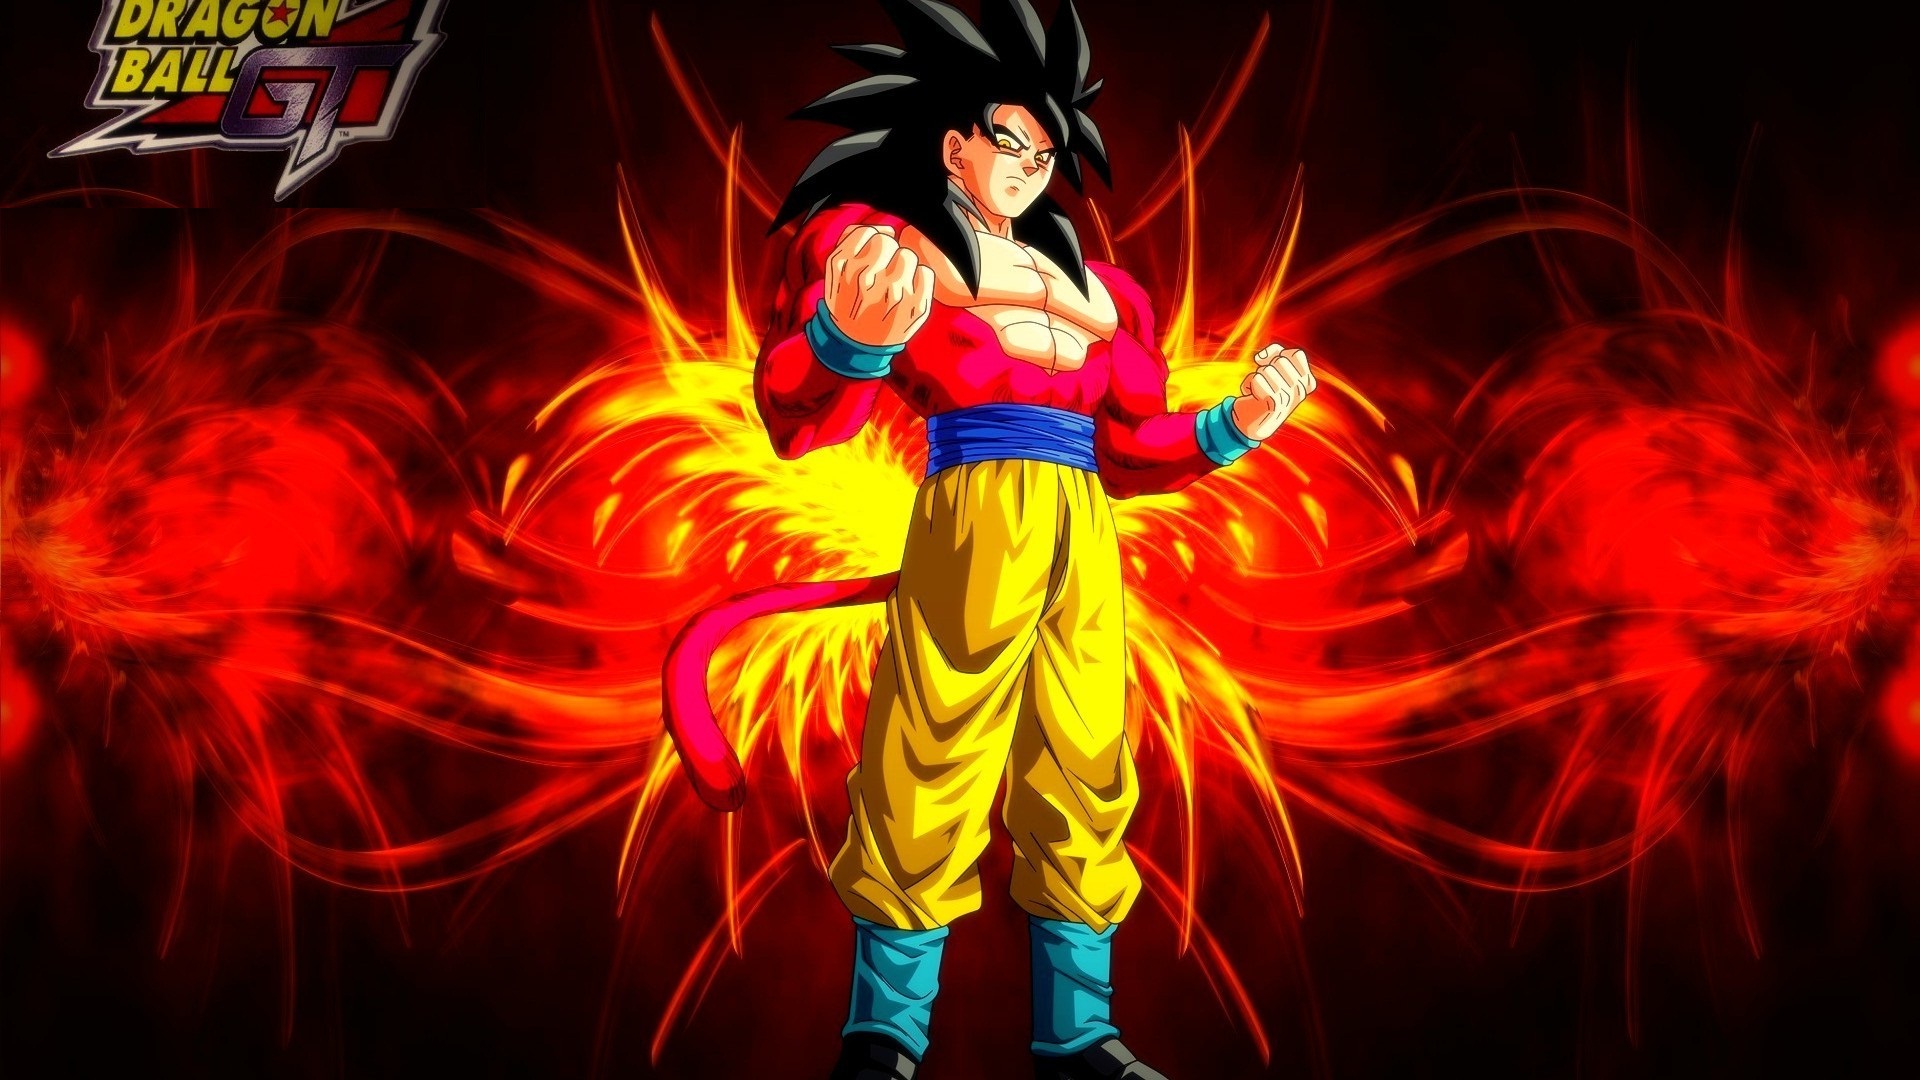 Goku SSJ4 Wallpaper HD With Resolution 1920X1080 pixel. You can make this wallpaper for your Desktop Computer Backgrounds, Mac Wallpapers, Android Lock screen or iPhone Screensavers